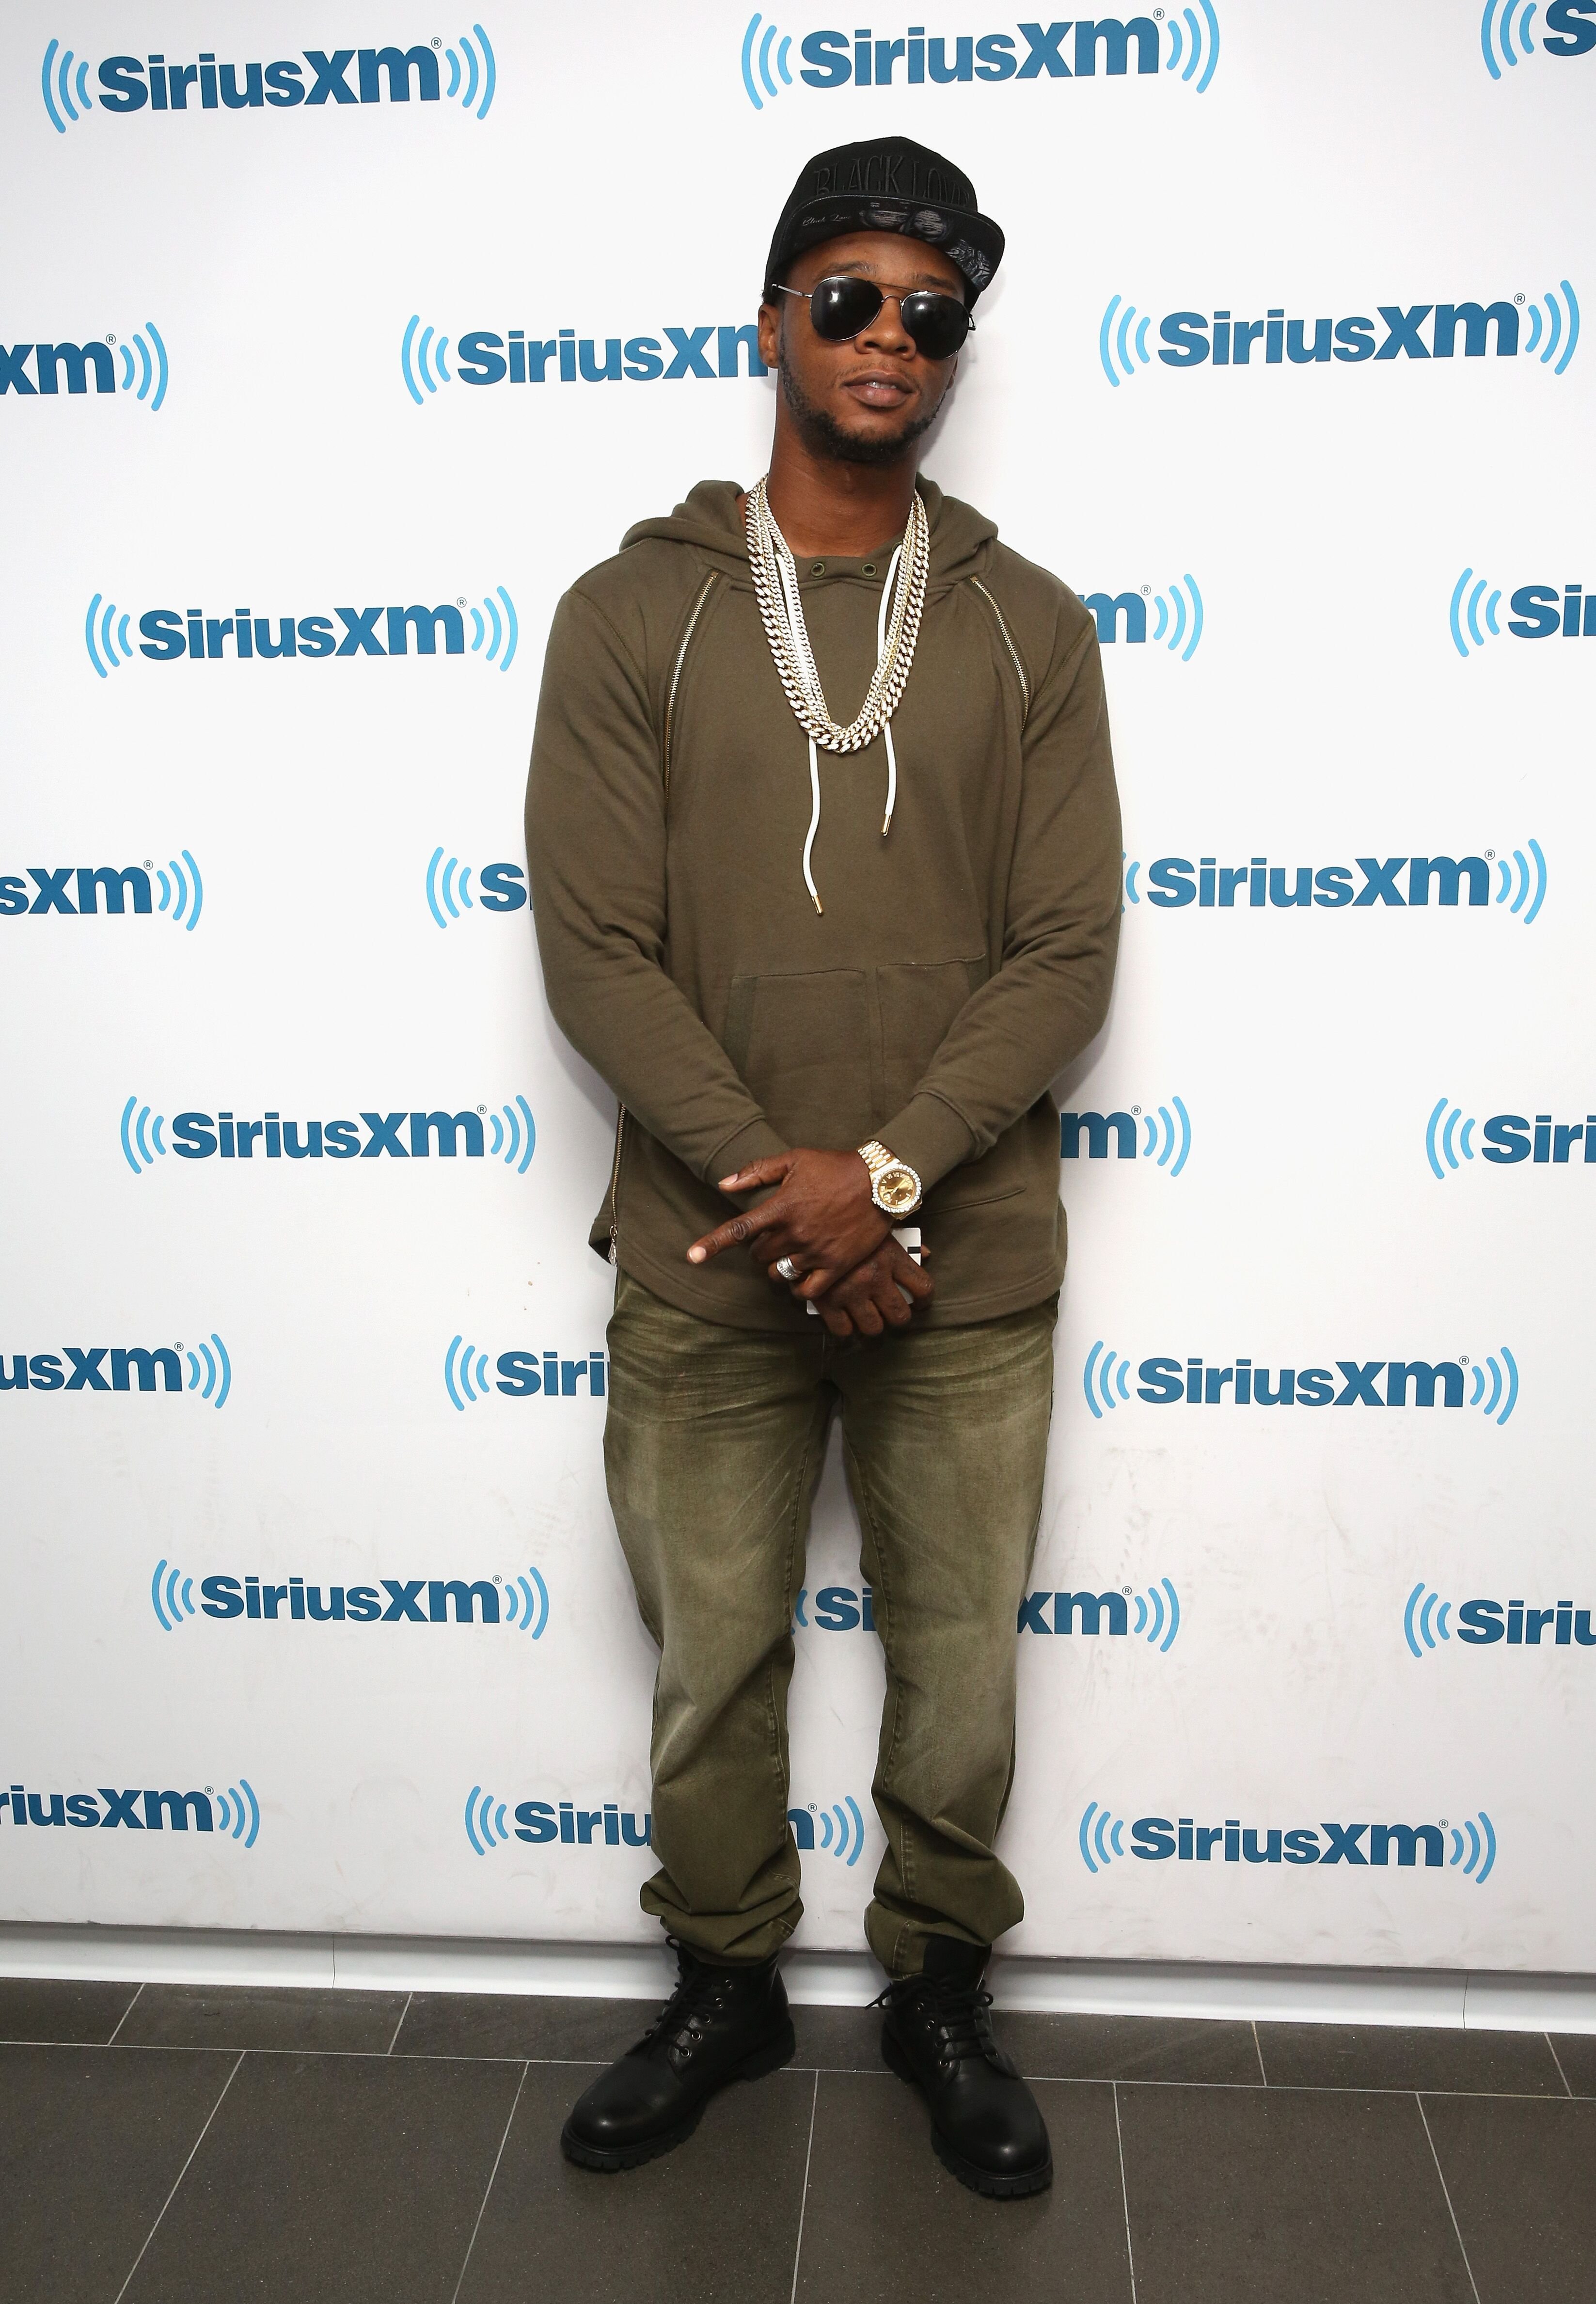 Rapper Papoose, whose real name is Shamele Mackie, visits the SiriusXM Studio on October 4, 2016 in New York City.  | Photo: Getty Images